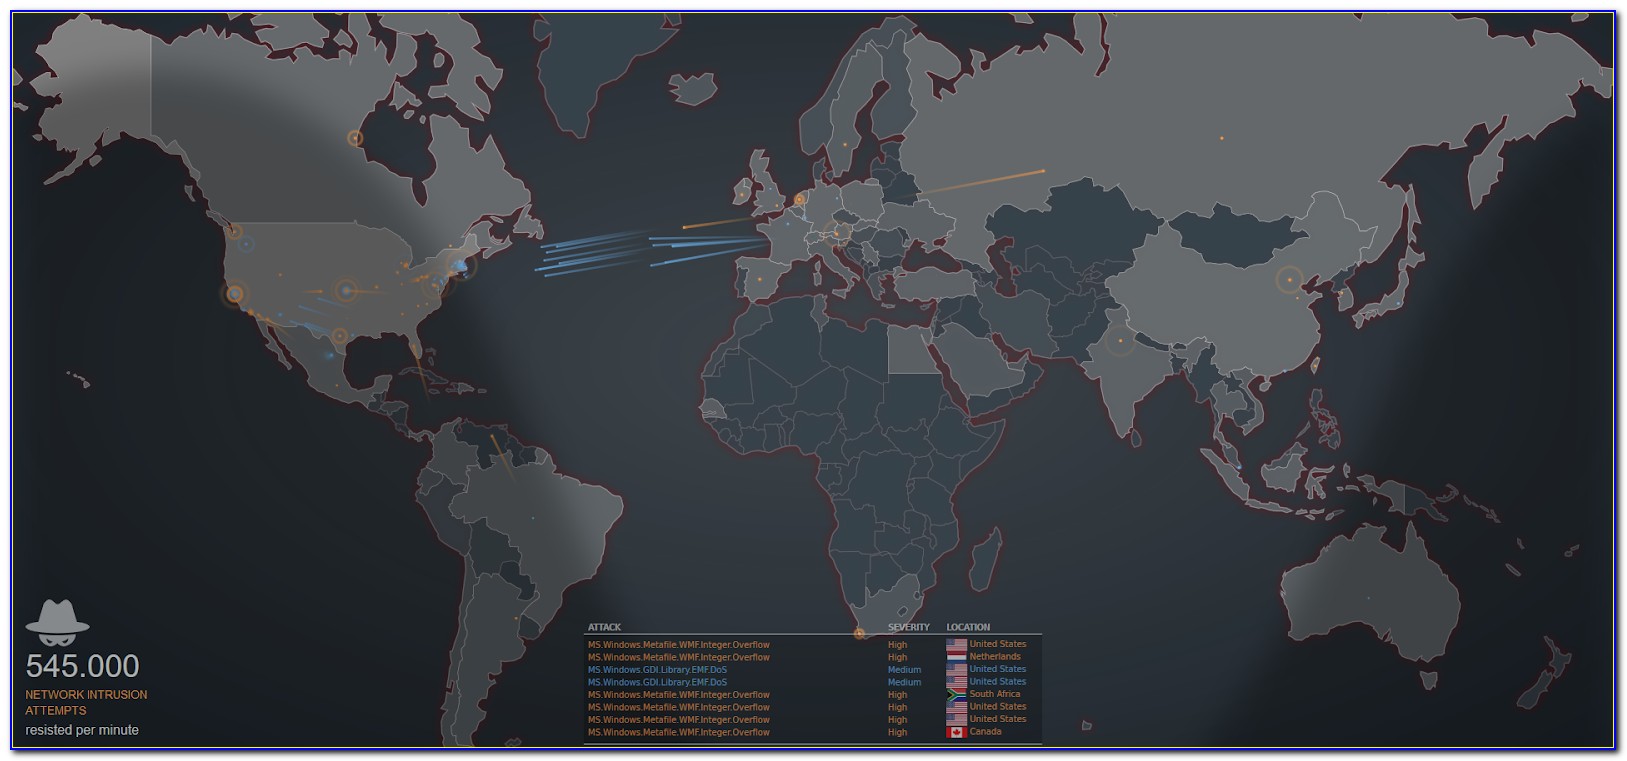 Fortinet Live Cyber Threat Map